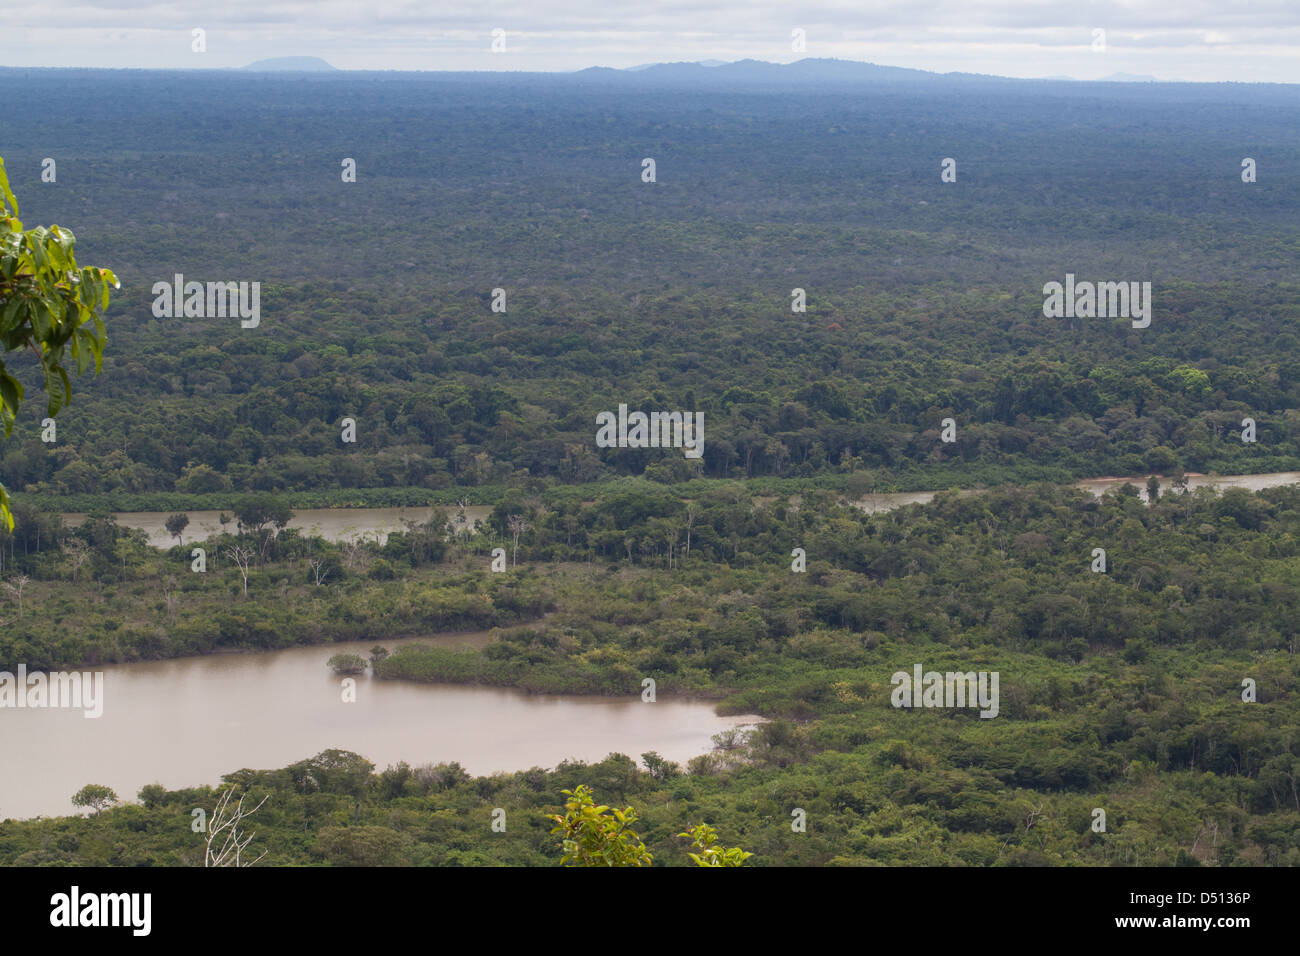 Rupununi River and oxbow lake, foreground. From Awarmie Mountain with a vertical drop of 200m view across swathes rainforest. Stock Photo